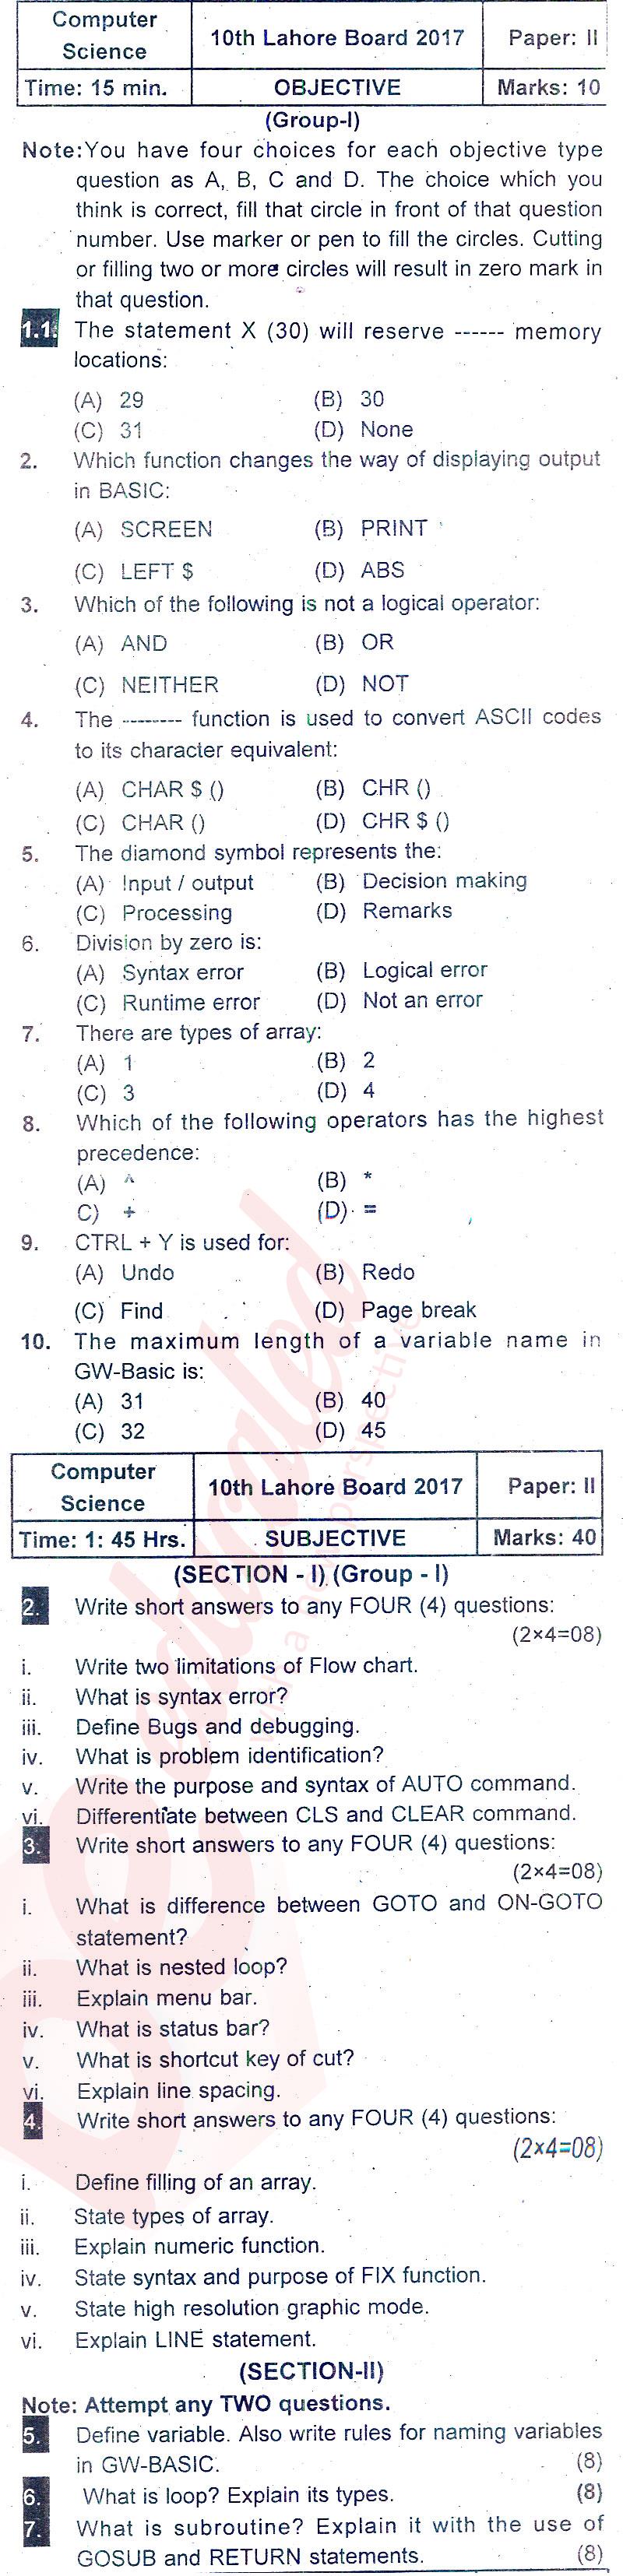 Computer Science 10th class Past Paper Group 1 BISE Lahore 2017